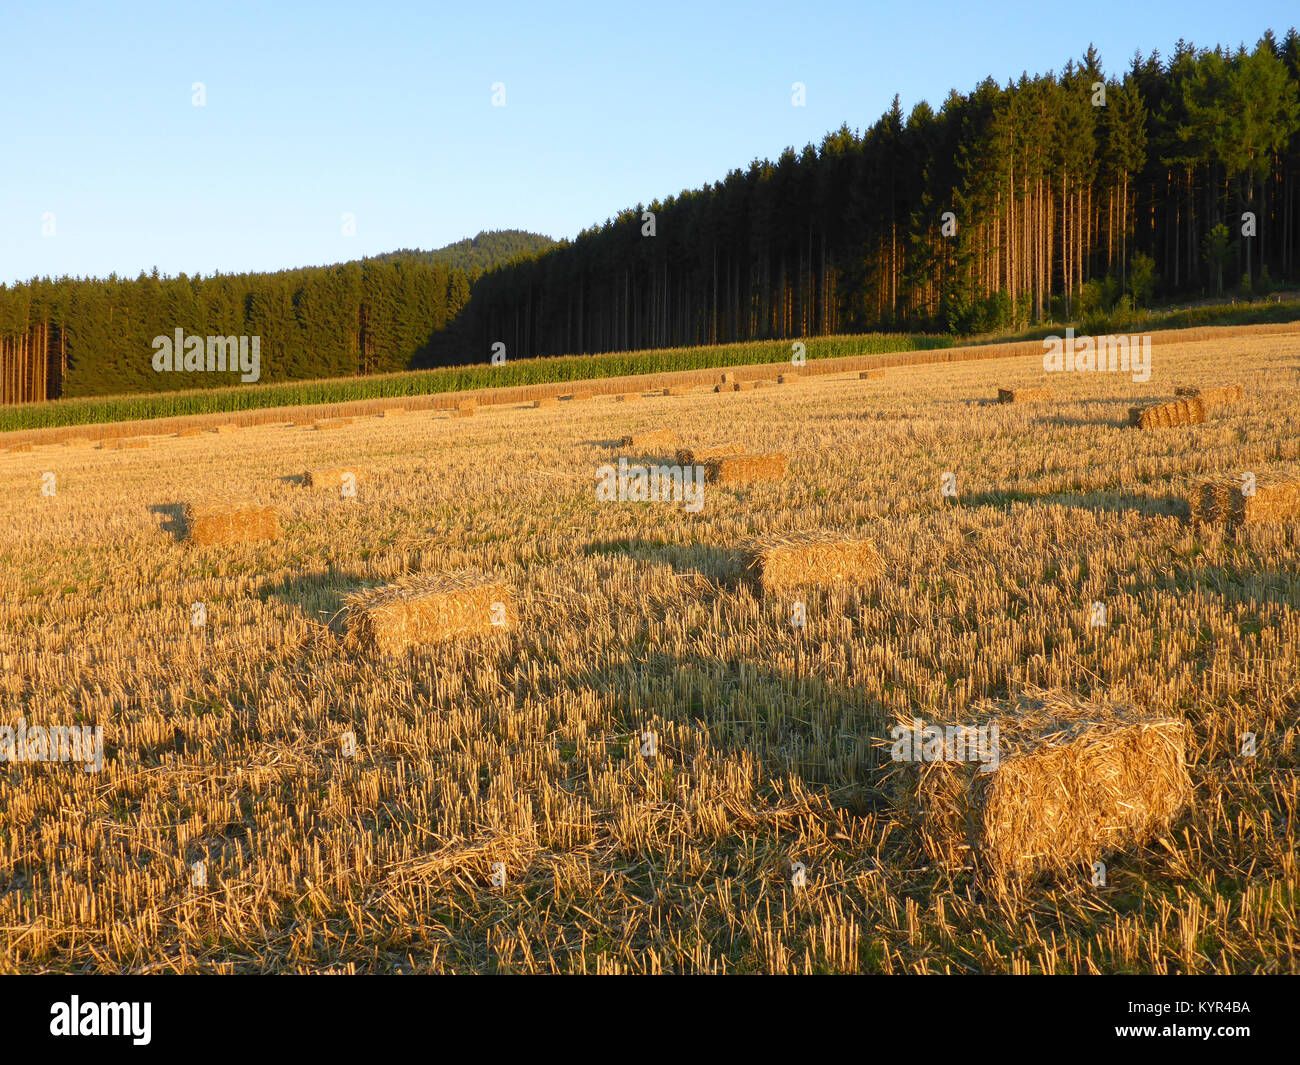 field with rectangular straw bales Stock Photo